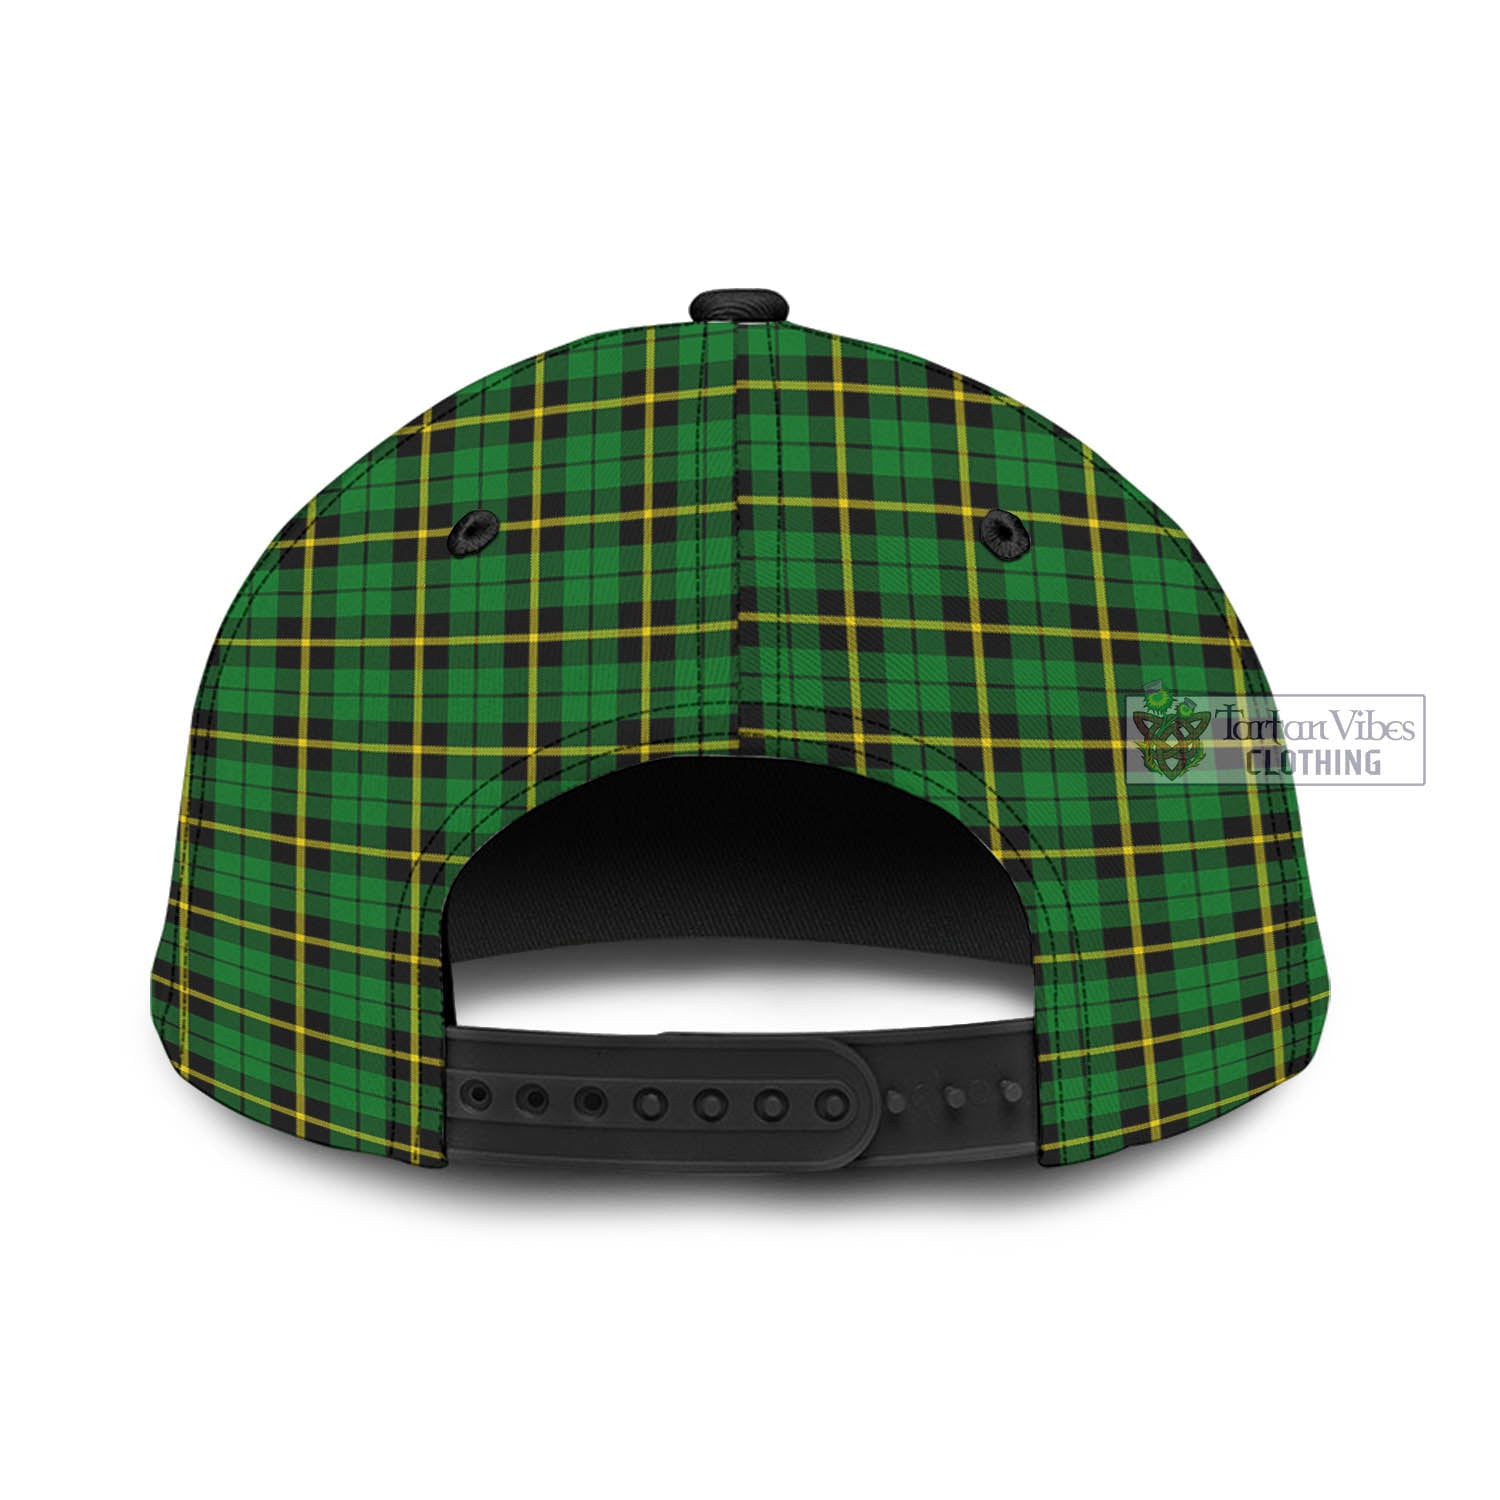 Tartan Vibes Clothing Wallace Hunting Green Tartan Classic Cap with Family Crest In Me Style